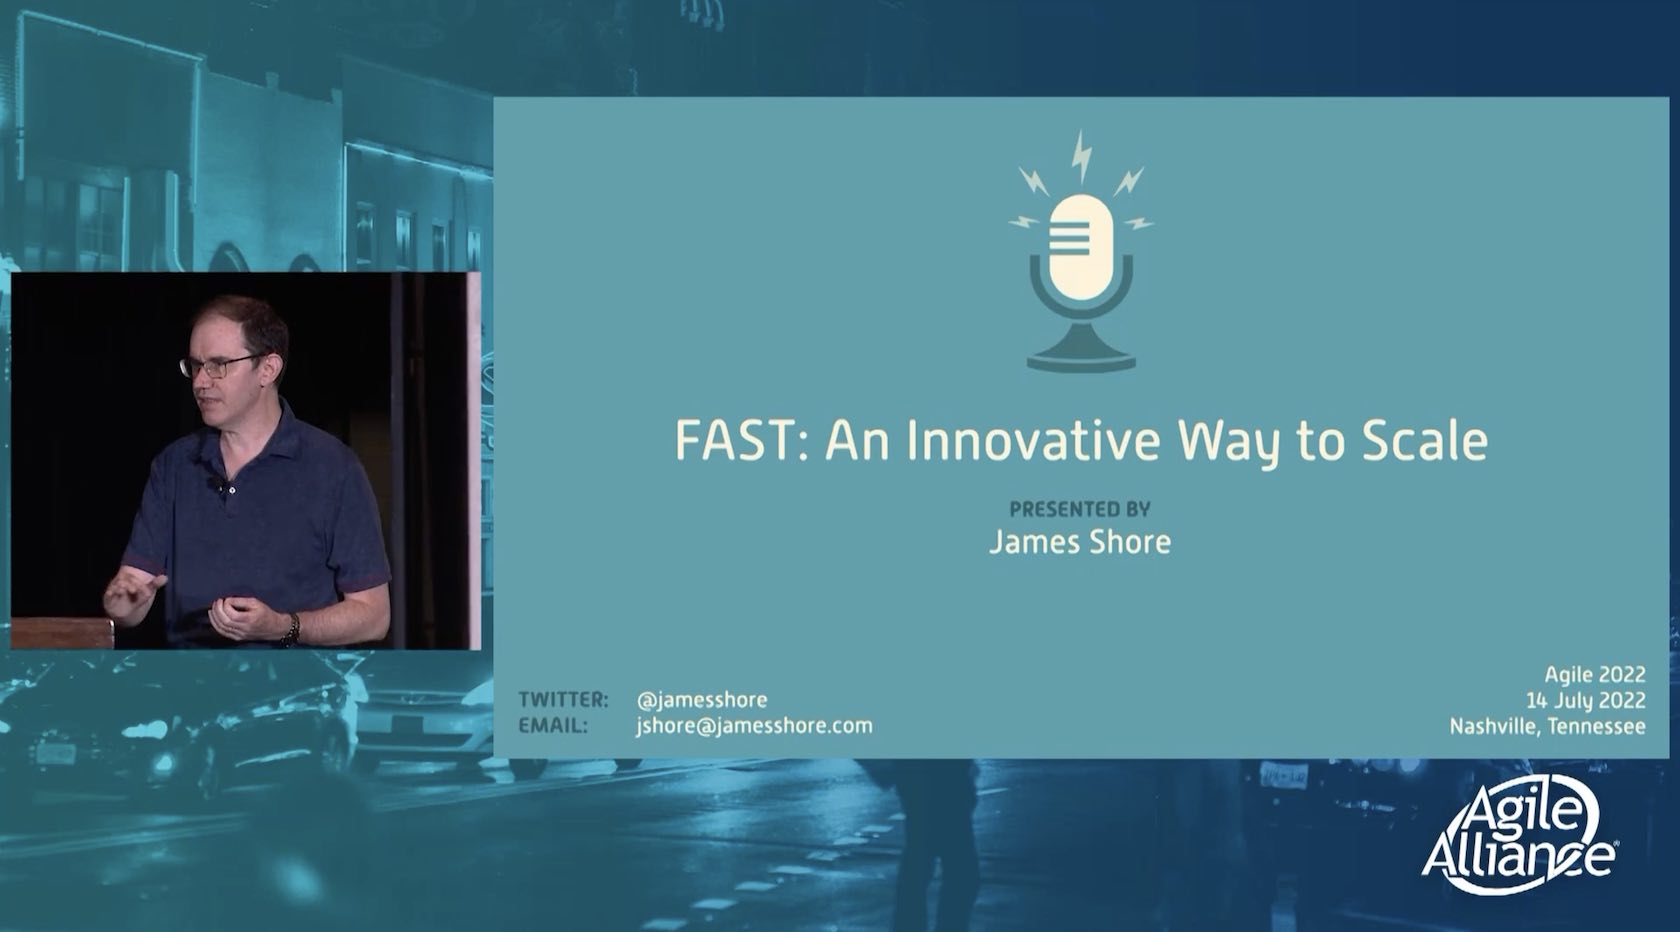 A picture of James Shore presenting “FAST: An Innovative Way to Scale” at Agile 2022.